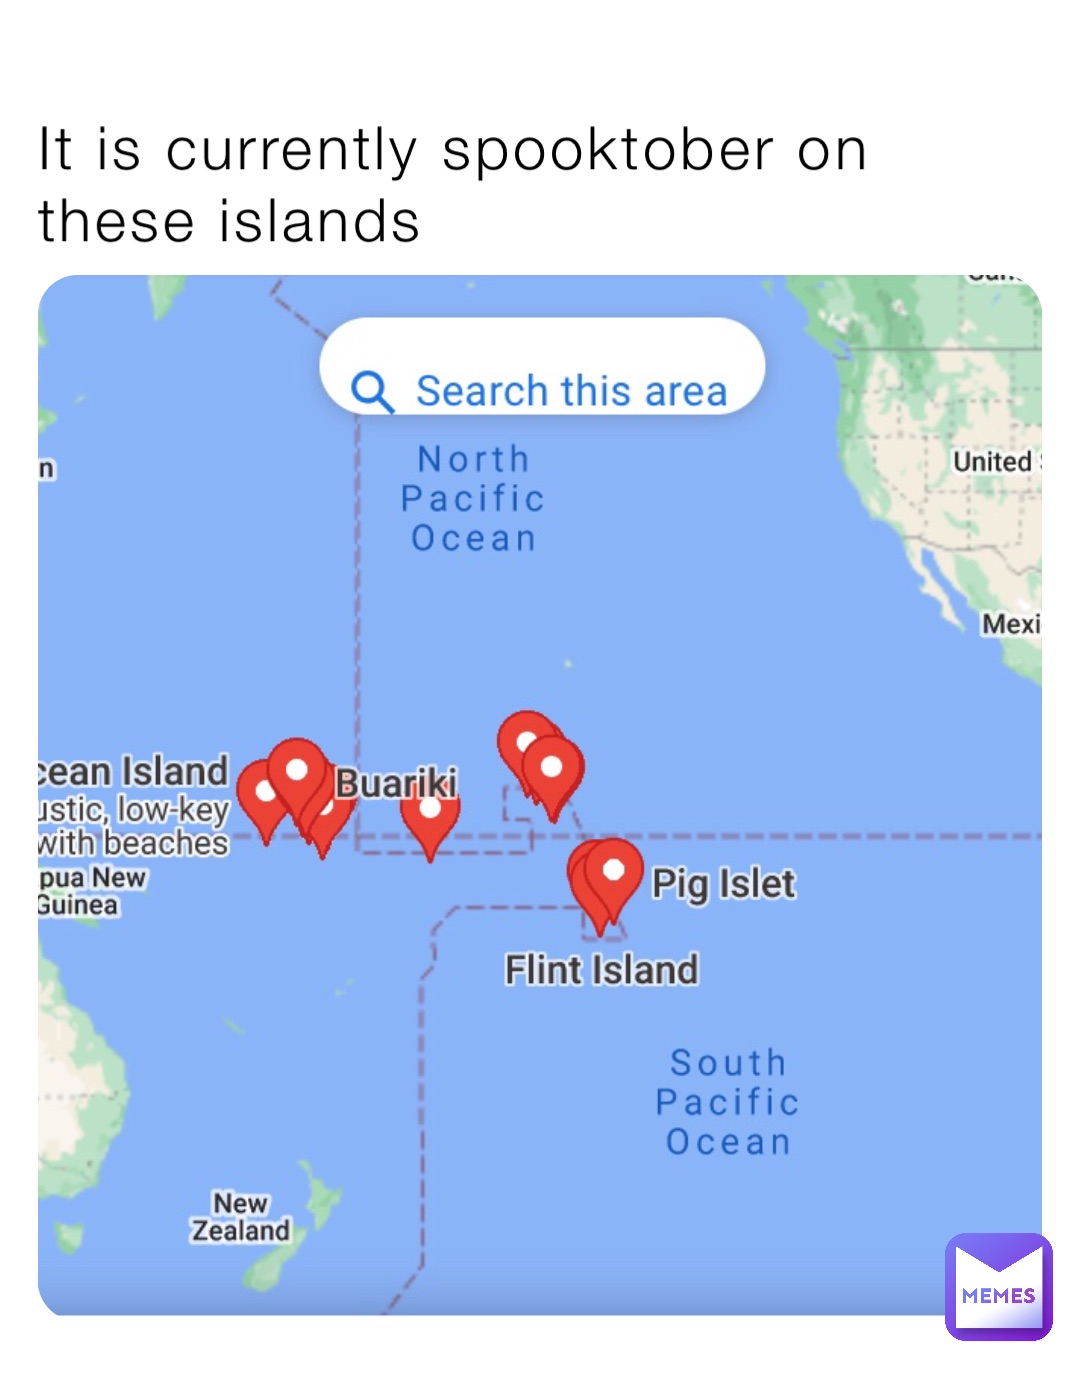 It is currently spooktober on these islands